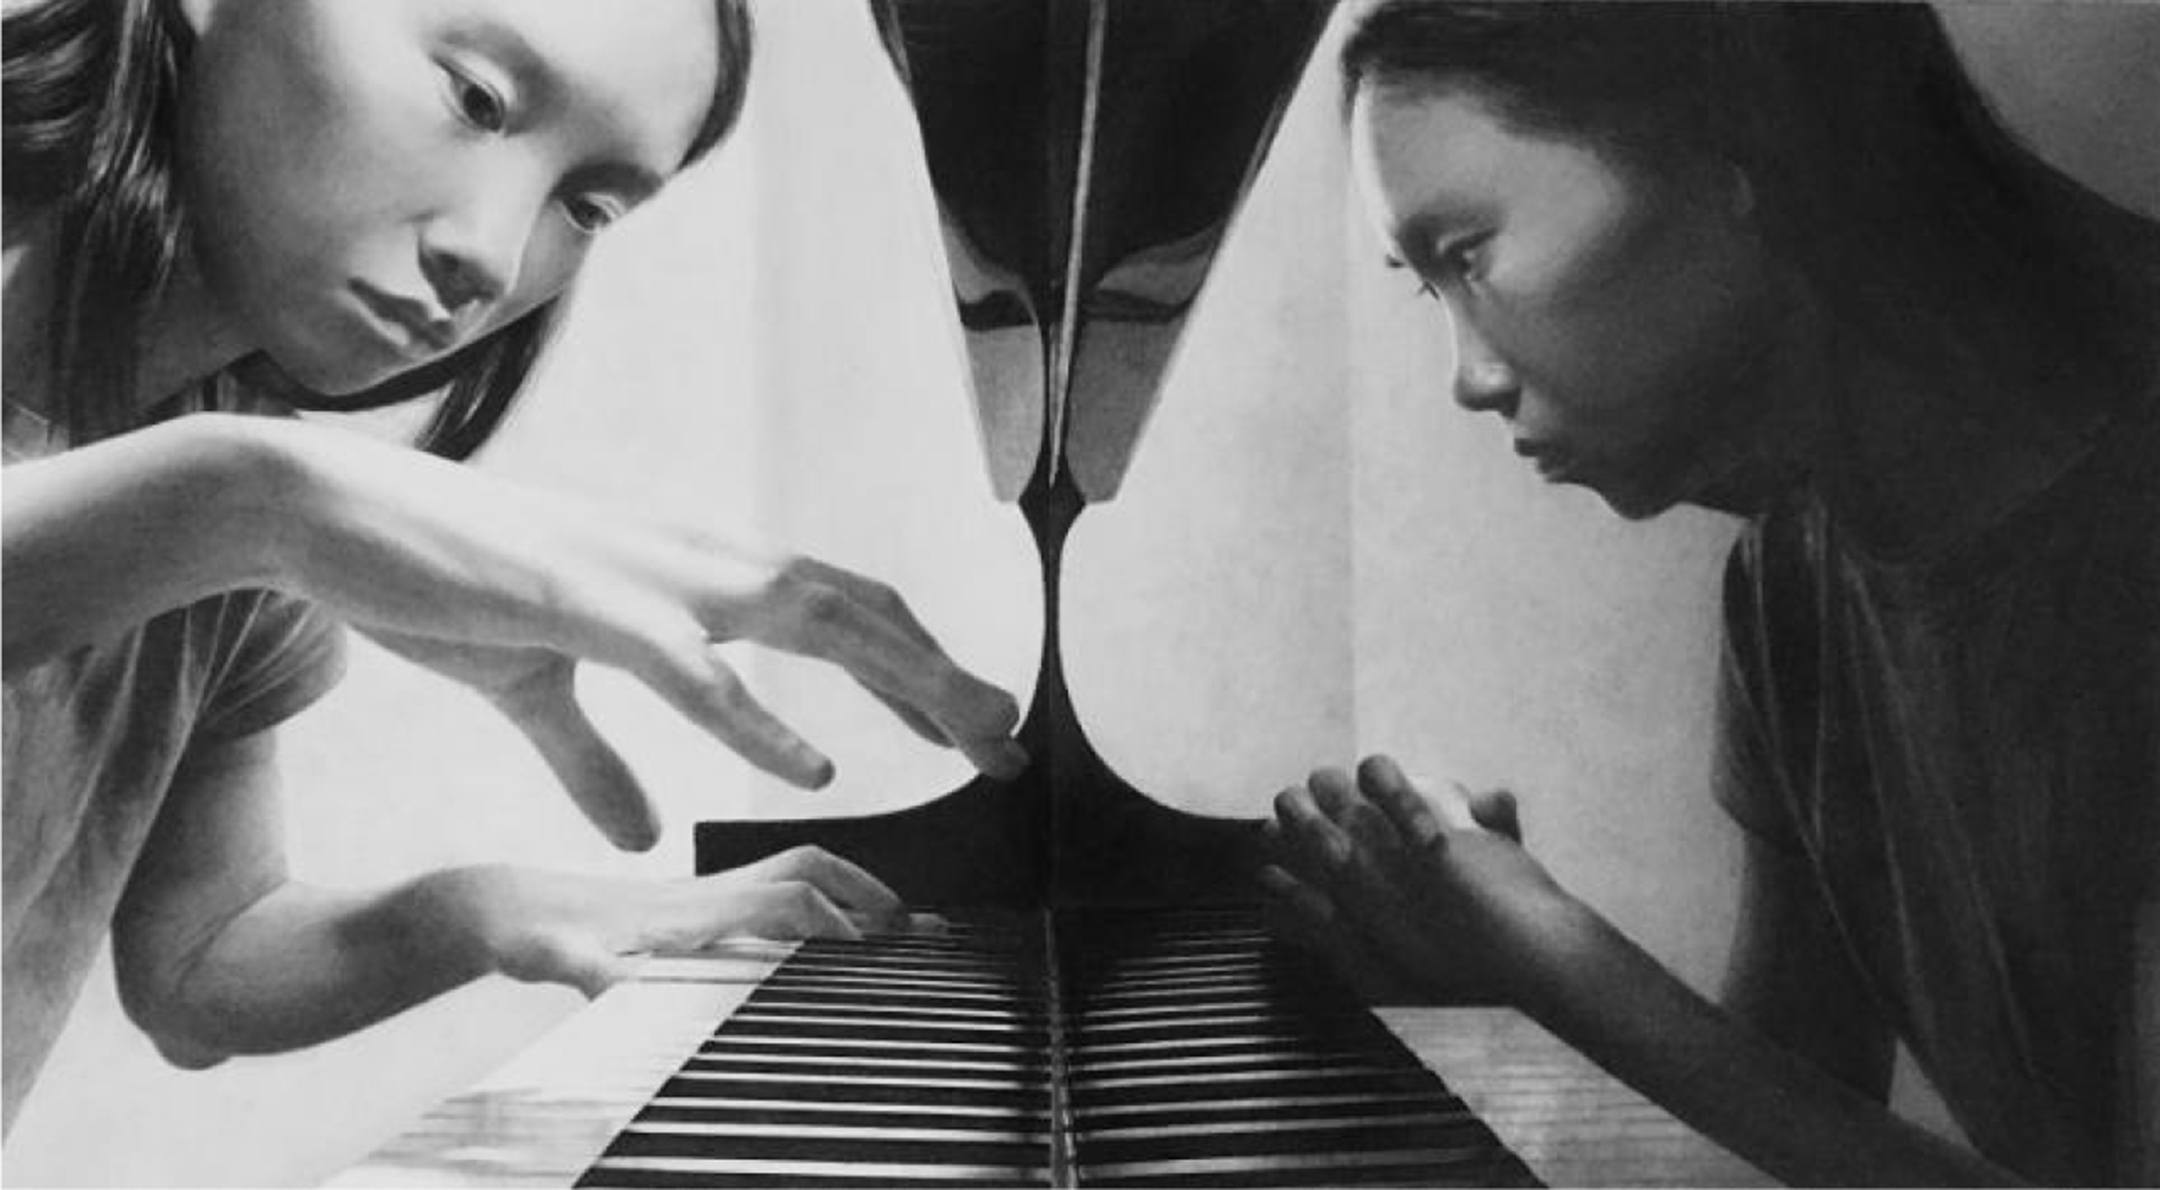 Black and white illustration of a young woman playing piano reflected in the piano's veneer